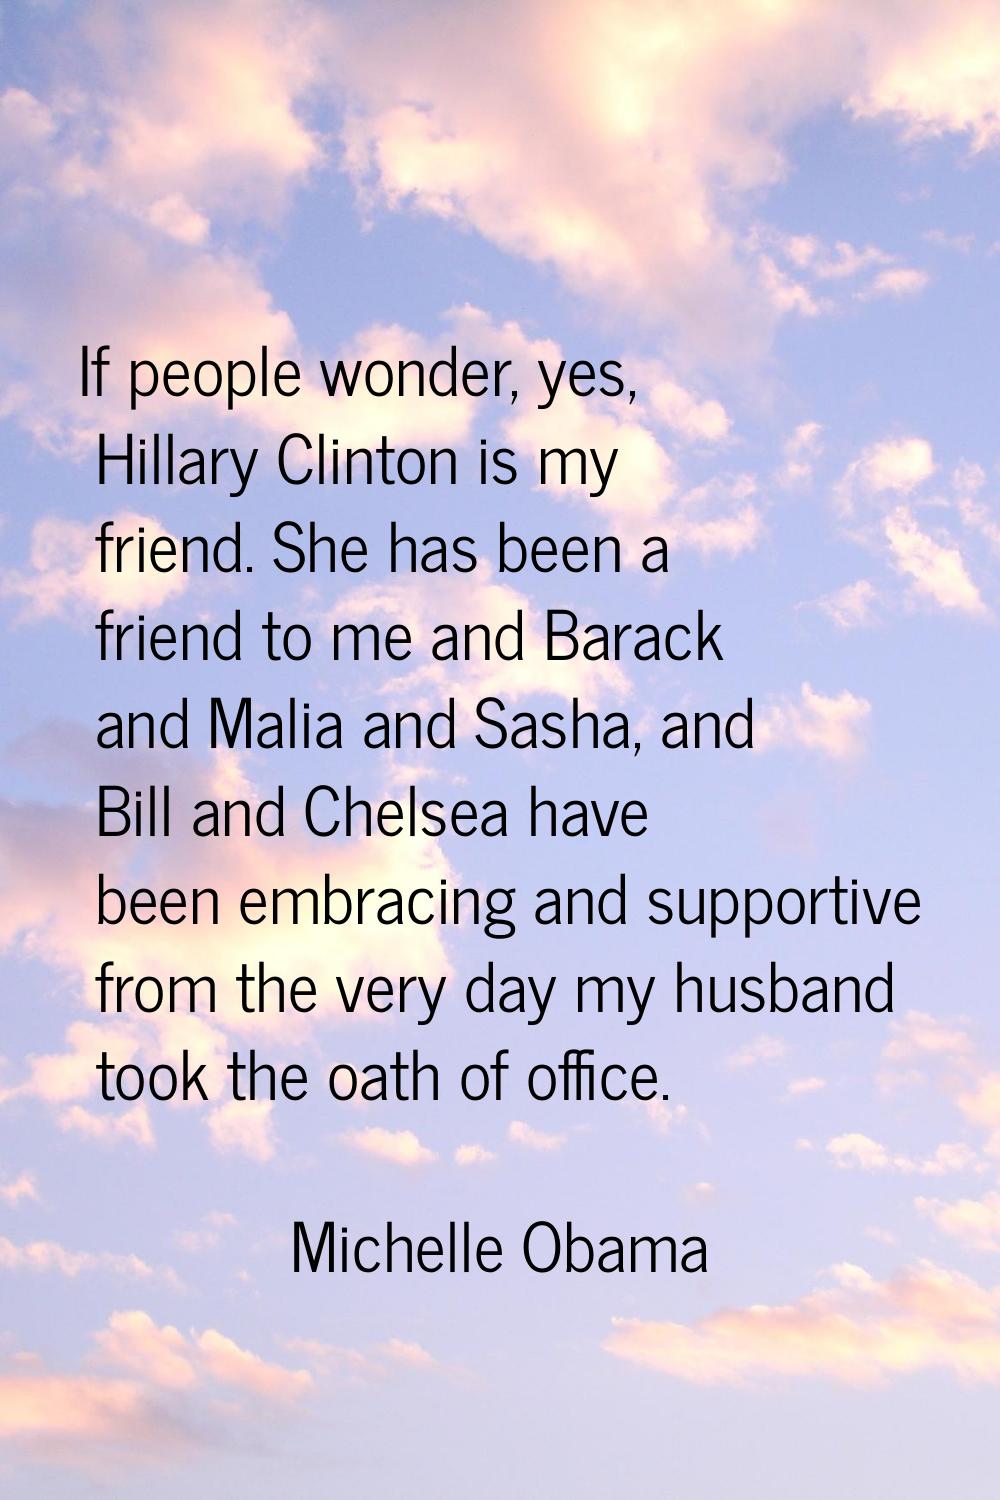 If people wonder, yes, Hillary Clinton is my friend. She has been a friend to me and Barack and Mal